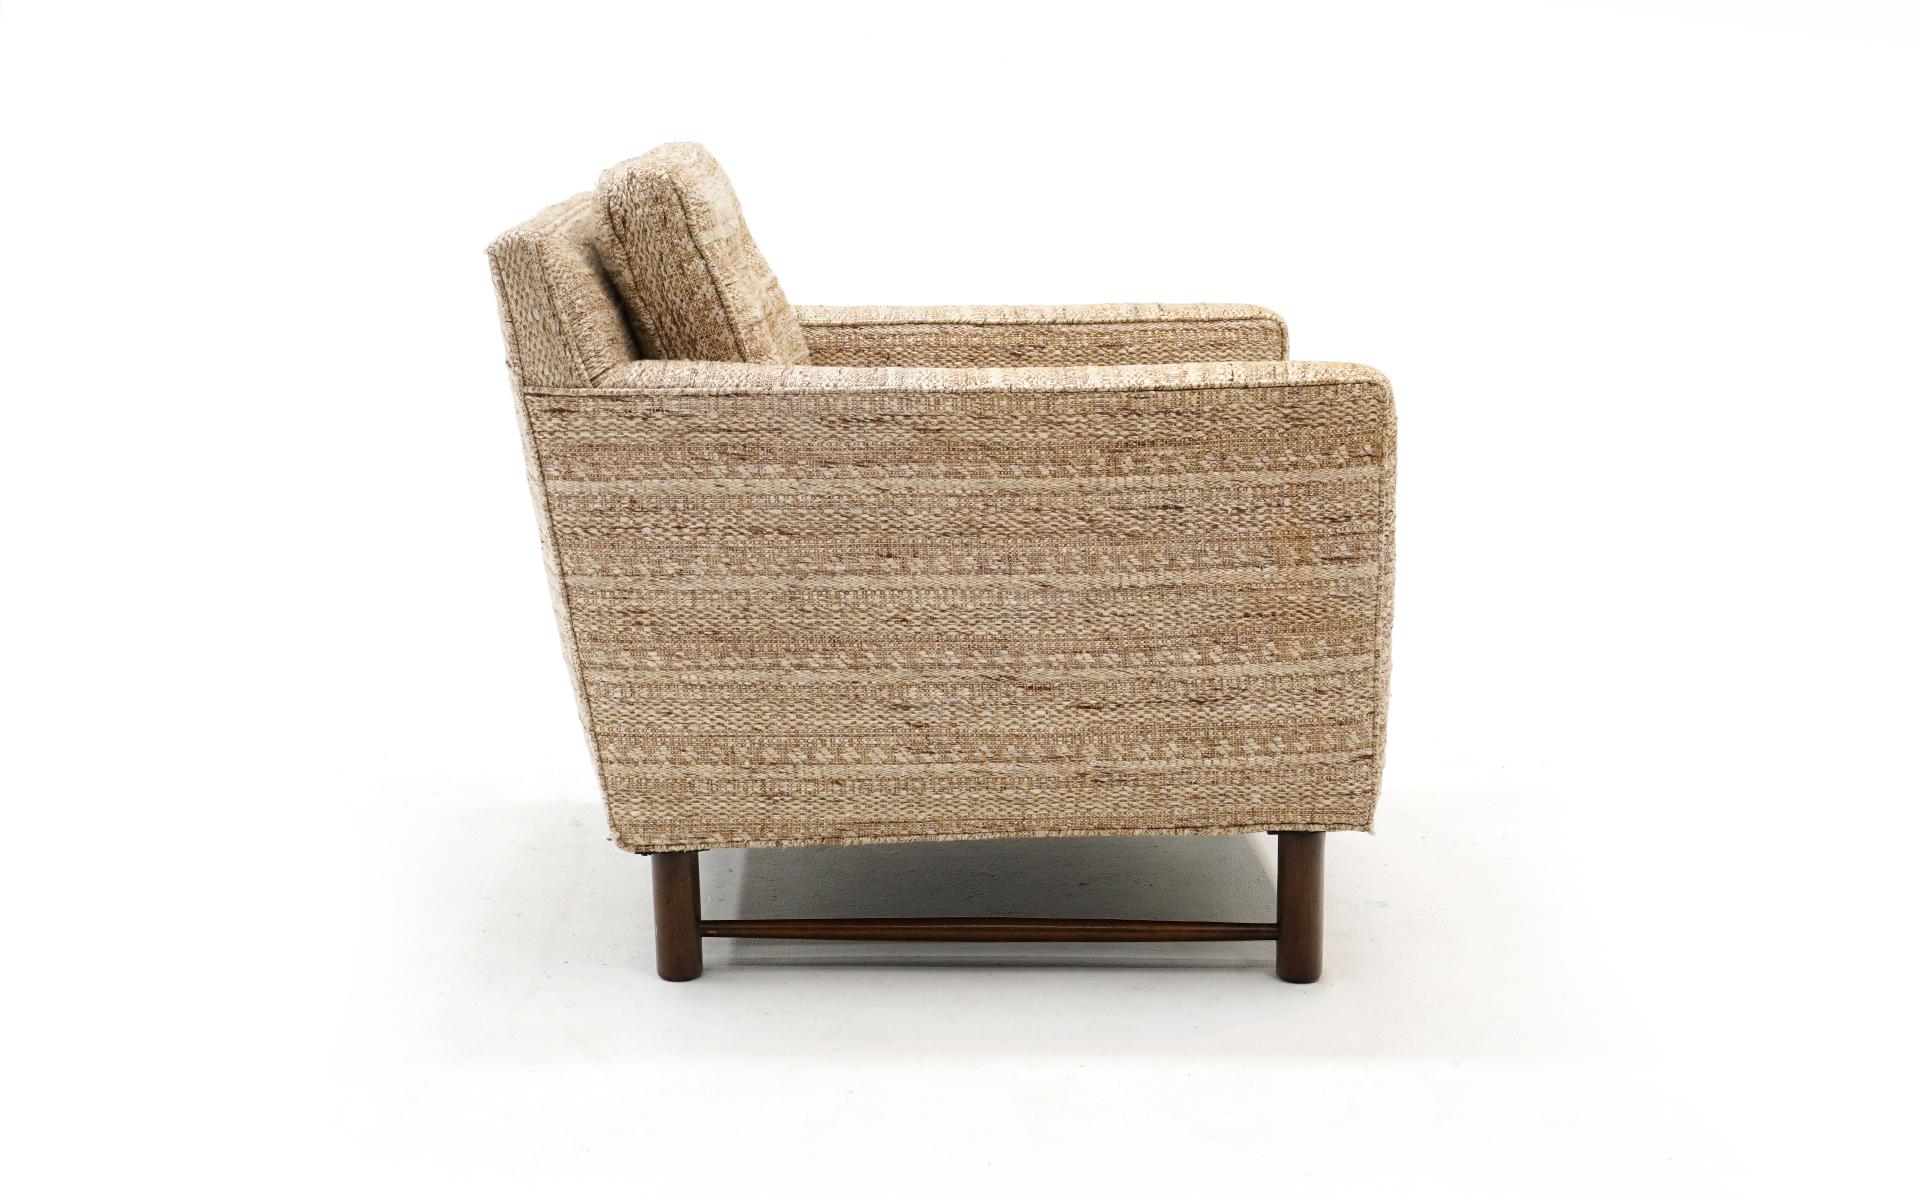 American Lounge Chair by Edward Wormley for Dunbar, Priced to Sell for Re-Upholstery